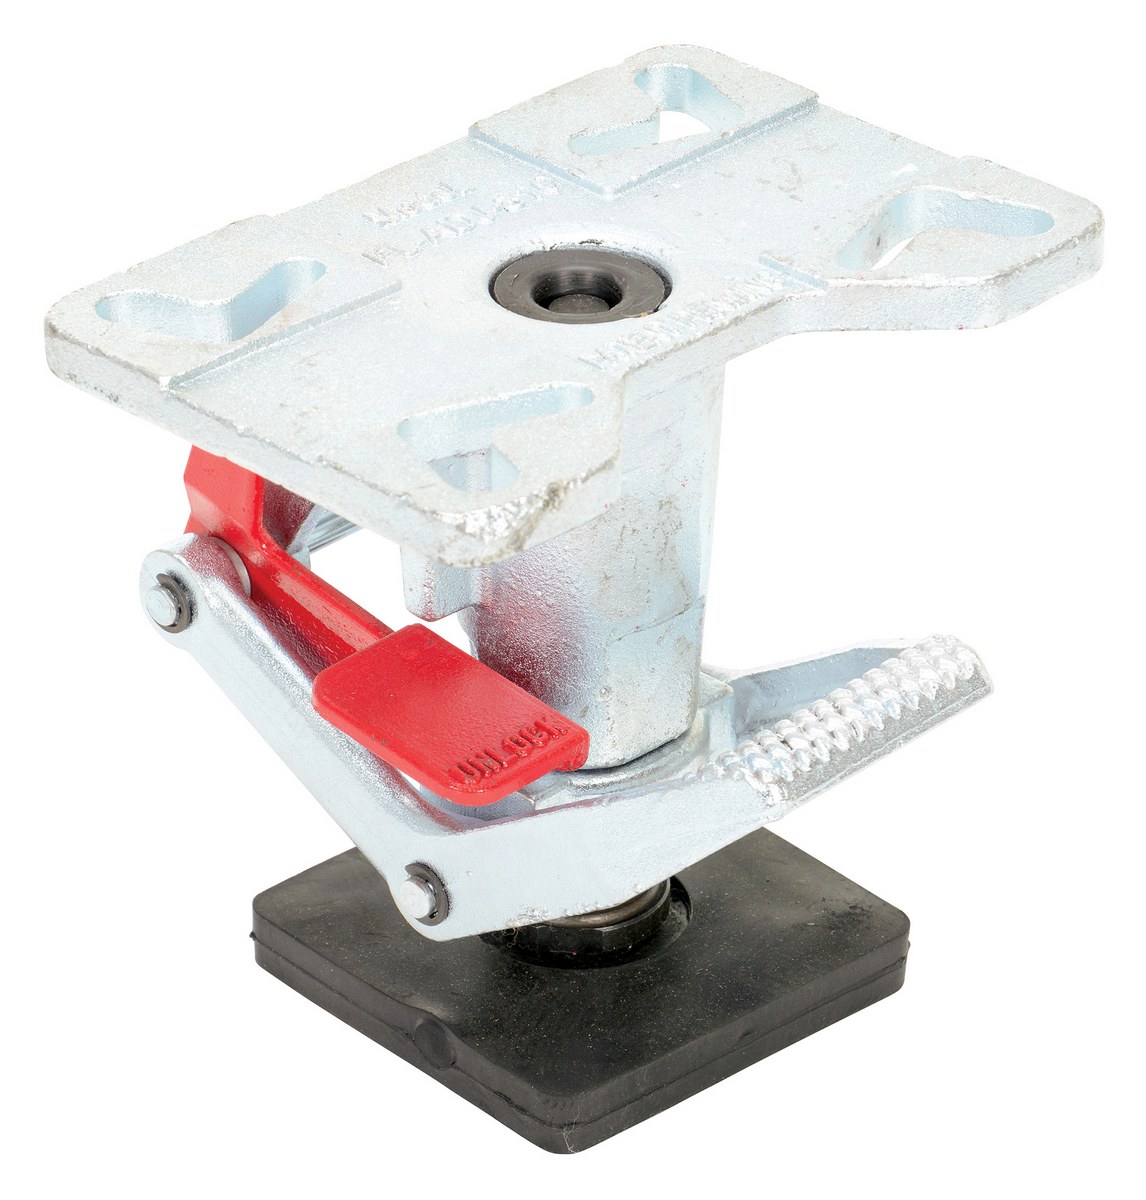 6 inch Floor Locks Brake 4 5 6 8 Casters with Non-Slip Rubber Foot 